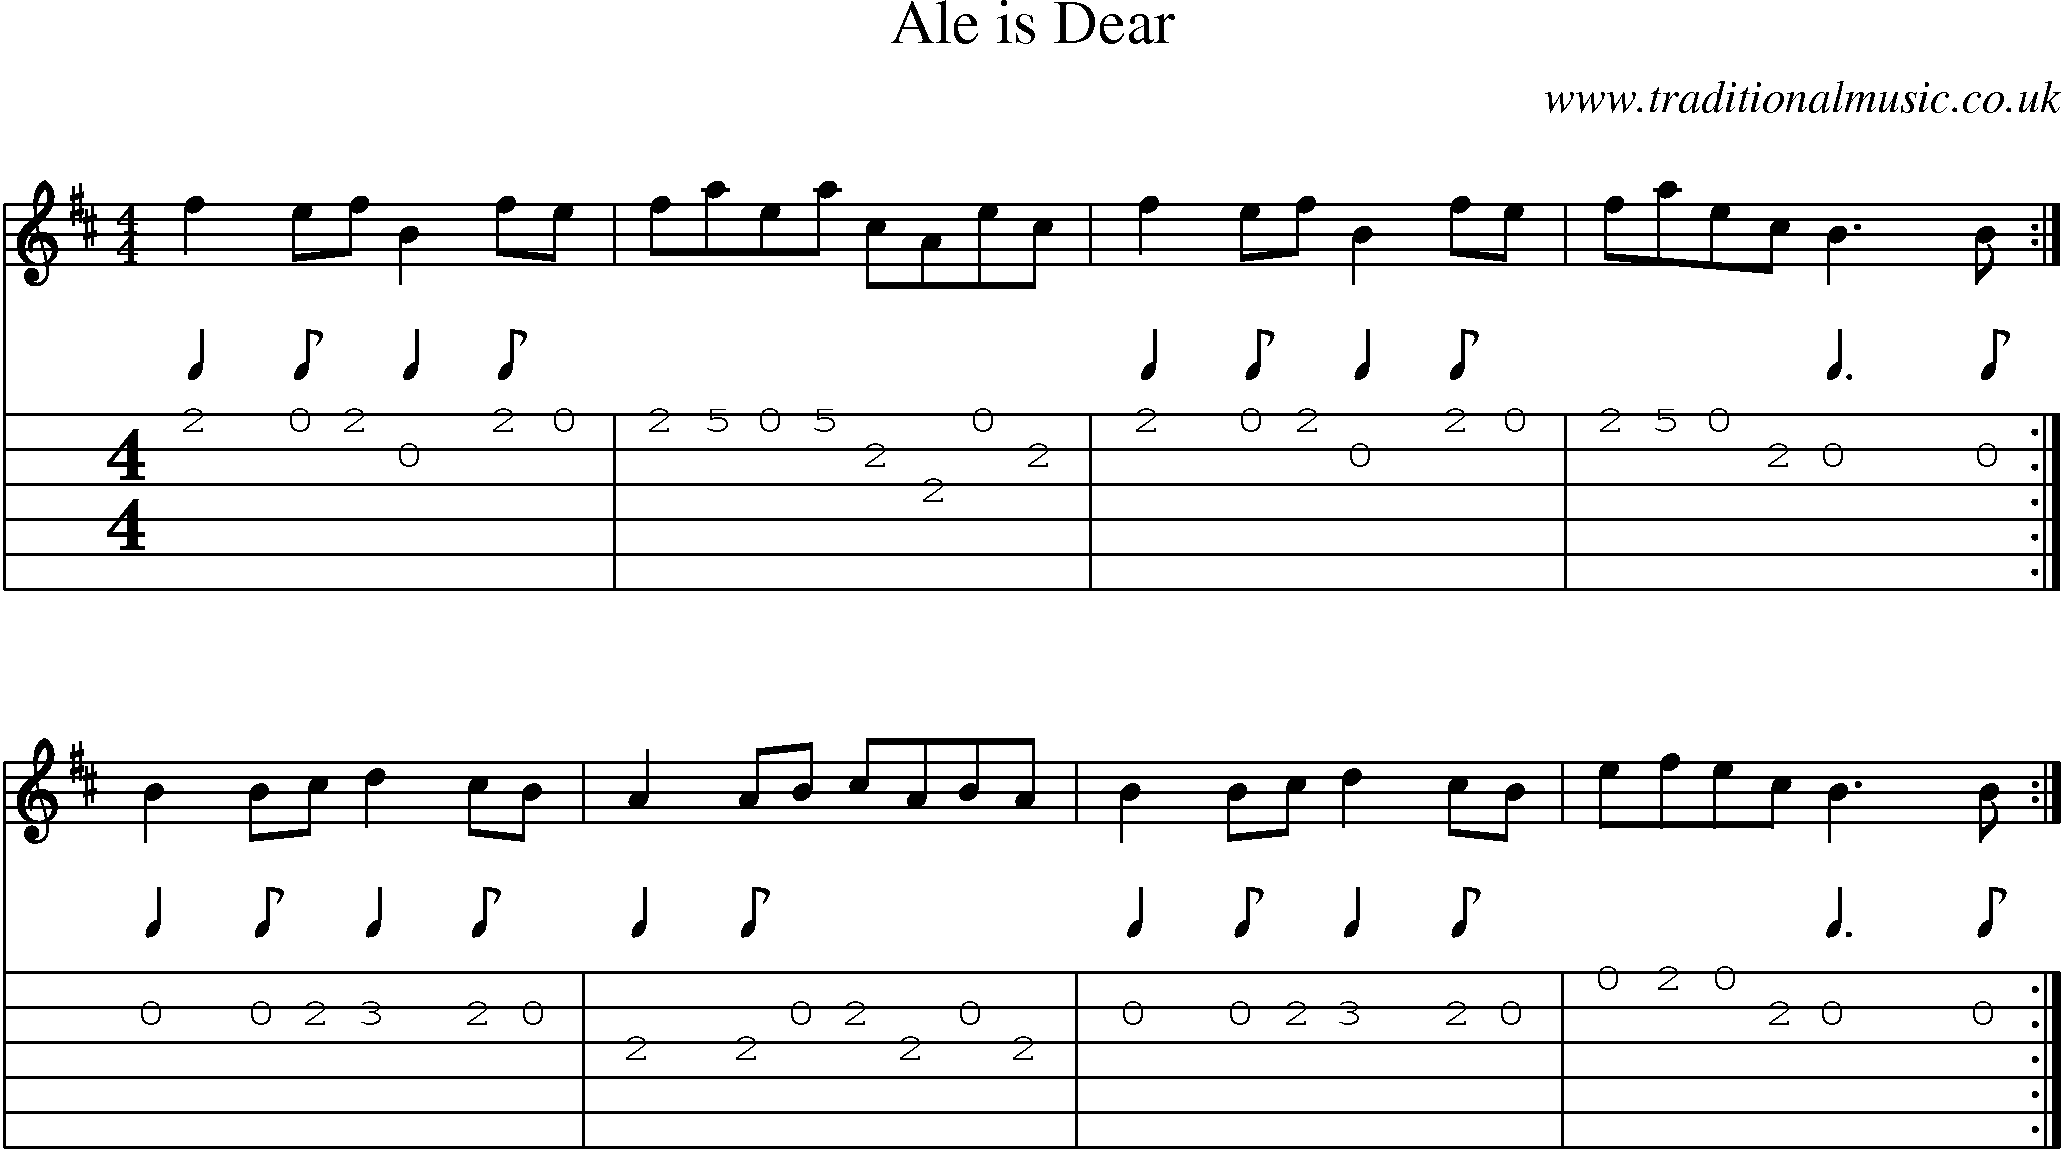 Music Score and Guitar Tabs for Ale Is Dear